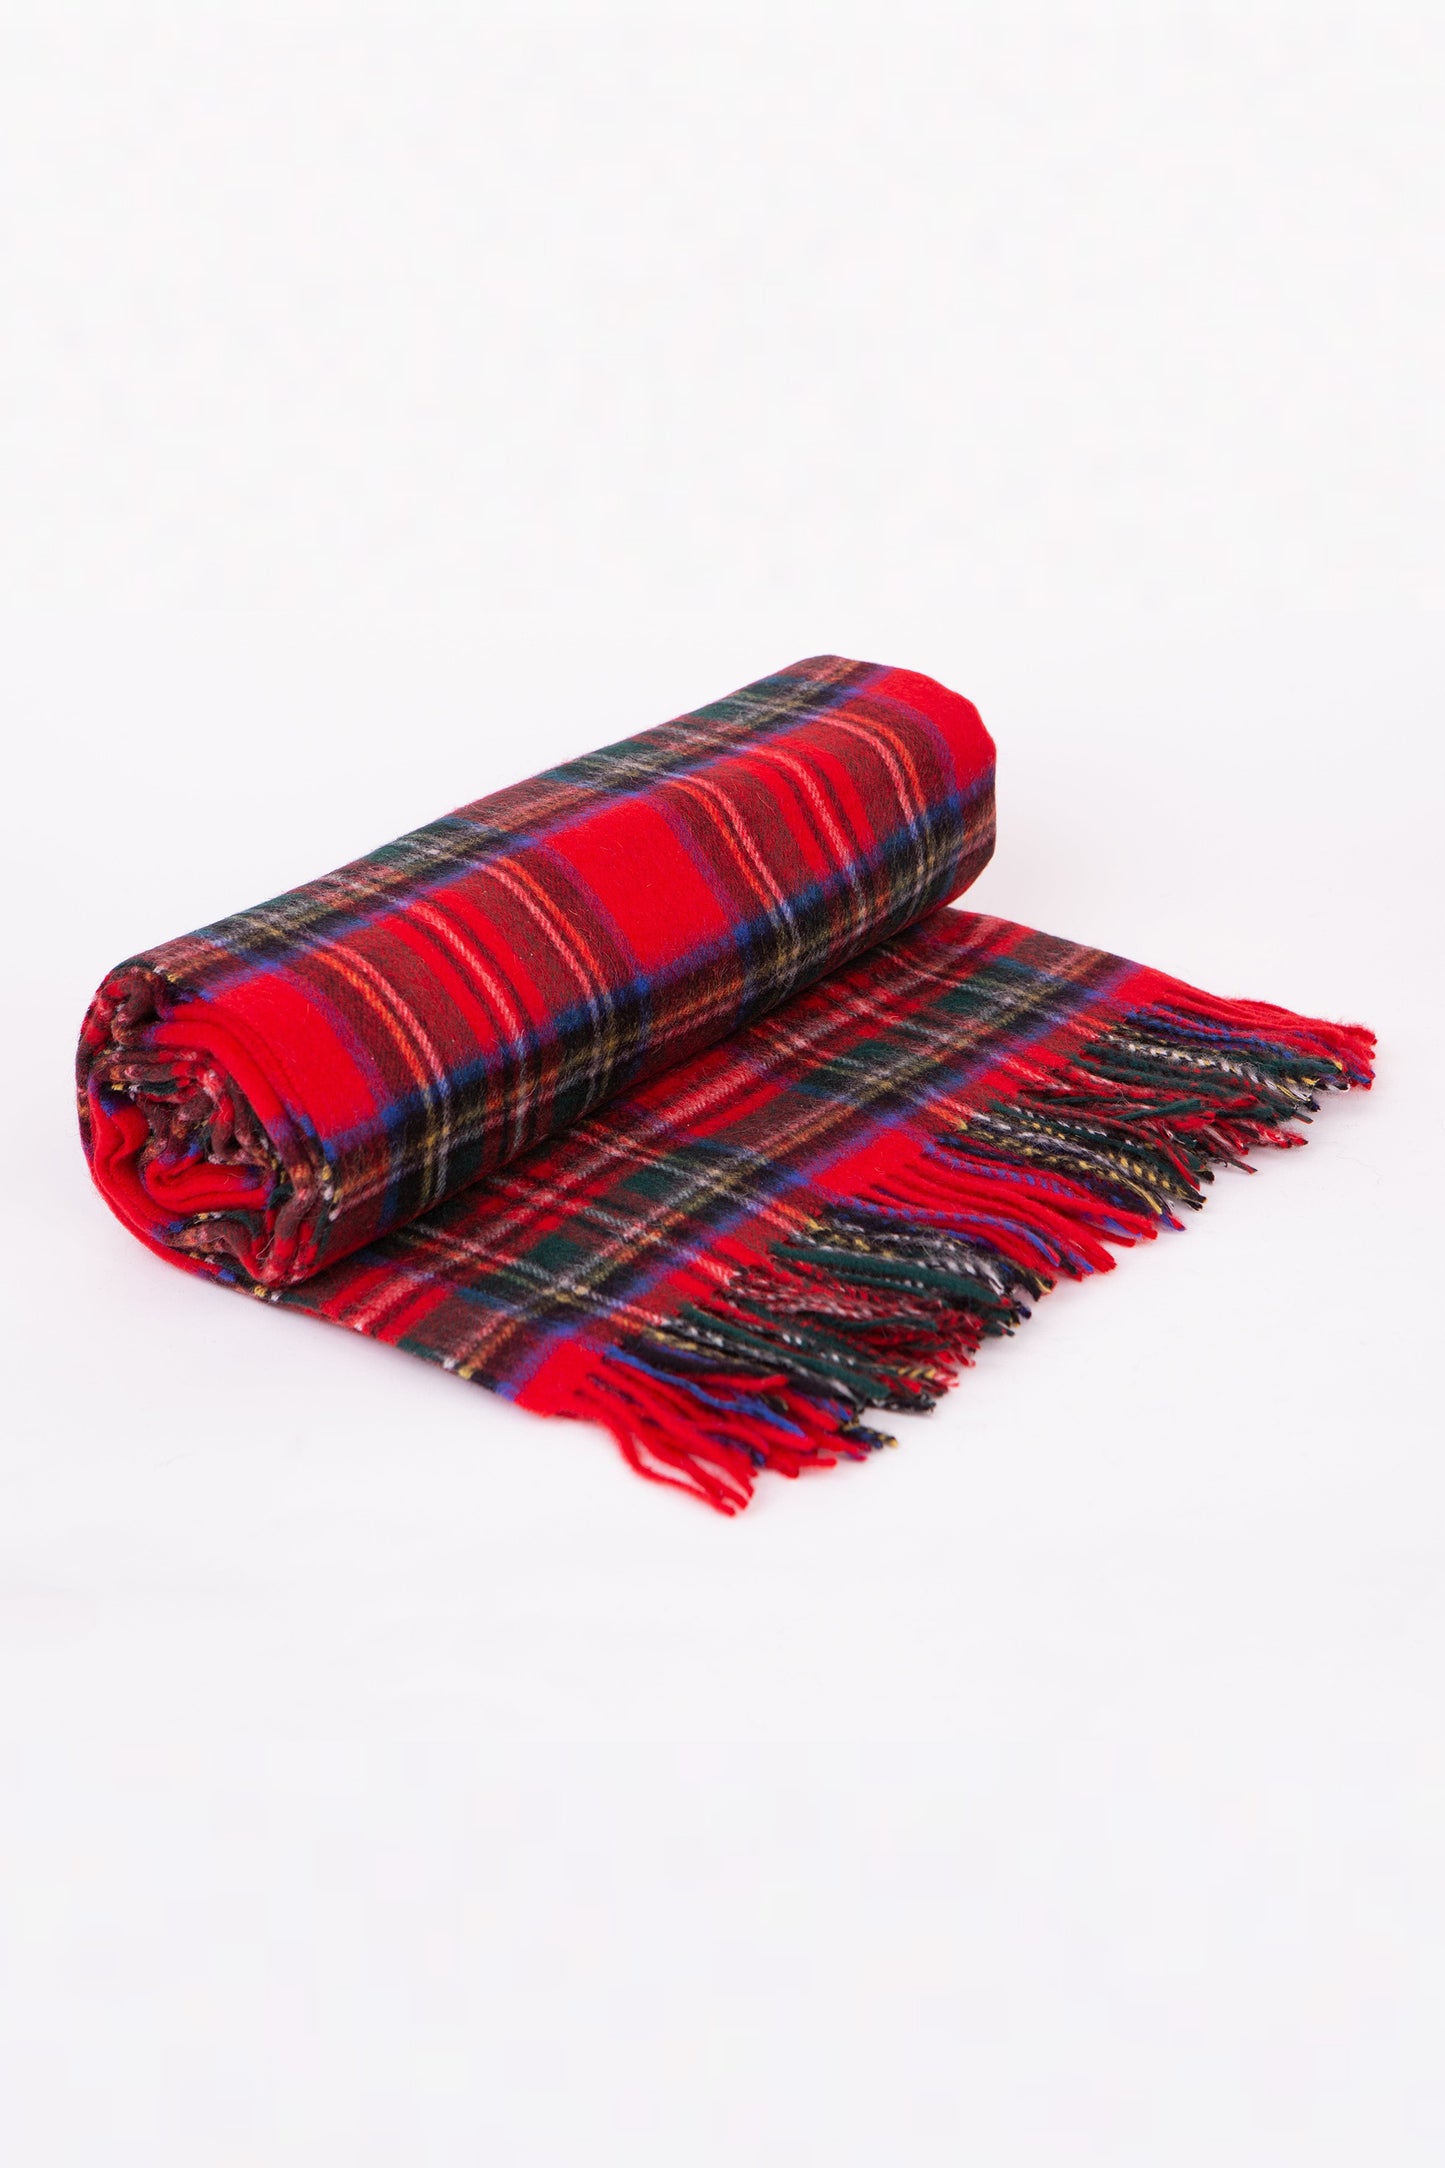 Lambswool Throw - Official Royal Stewart